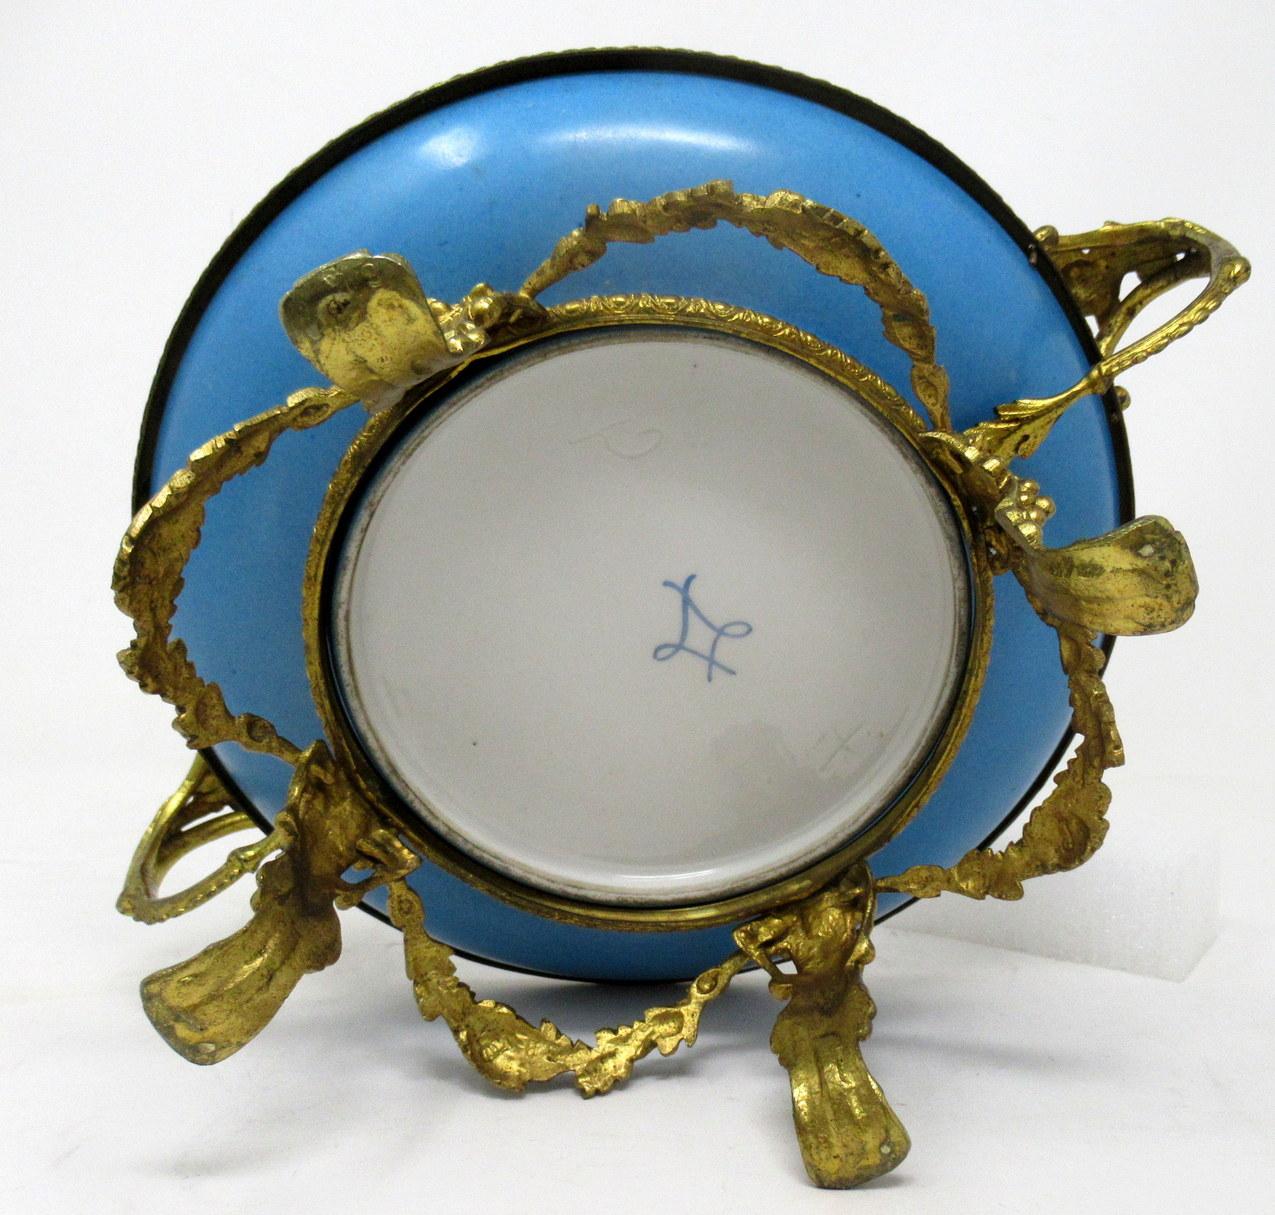 Antique French Sevres Ormolu Gilt Bronze Dore Porcelain Tazza Cabinet Plate Dish For Sale 2